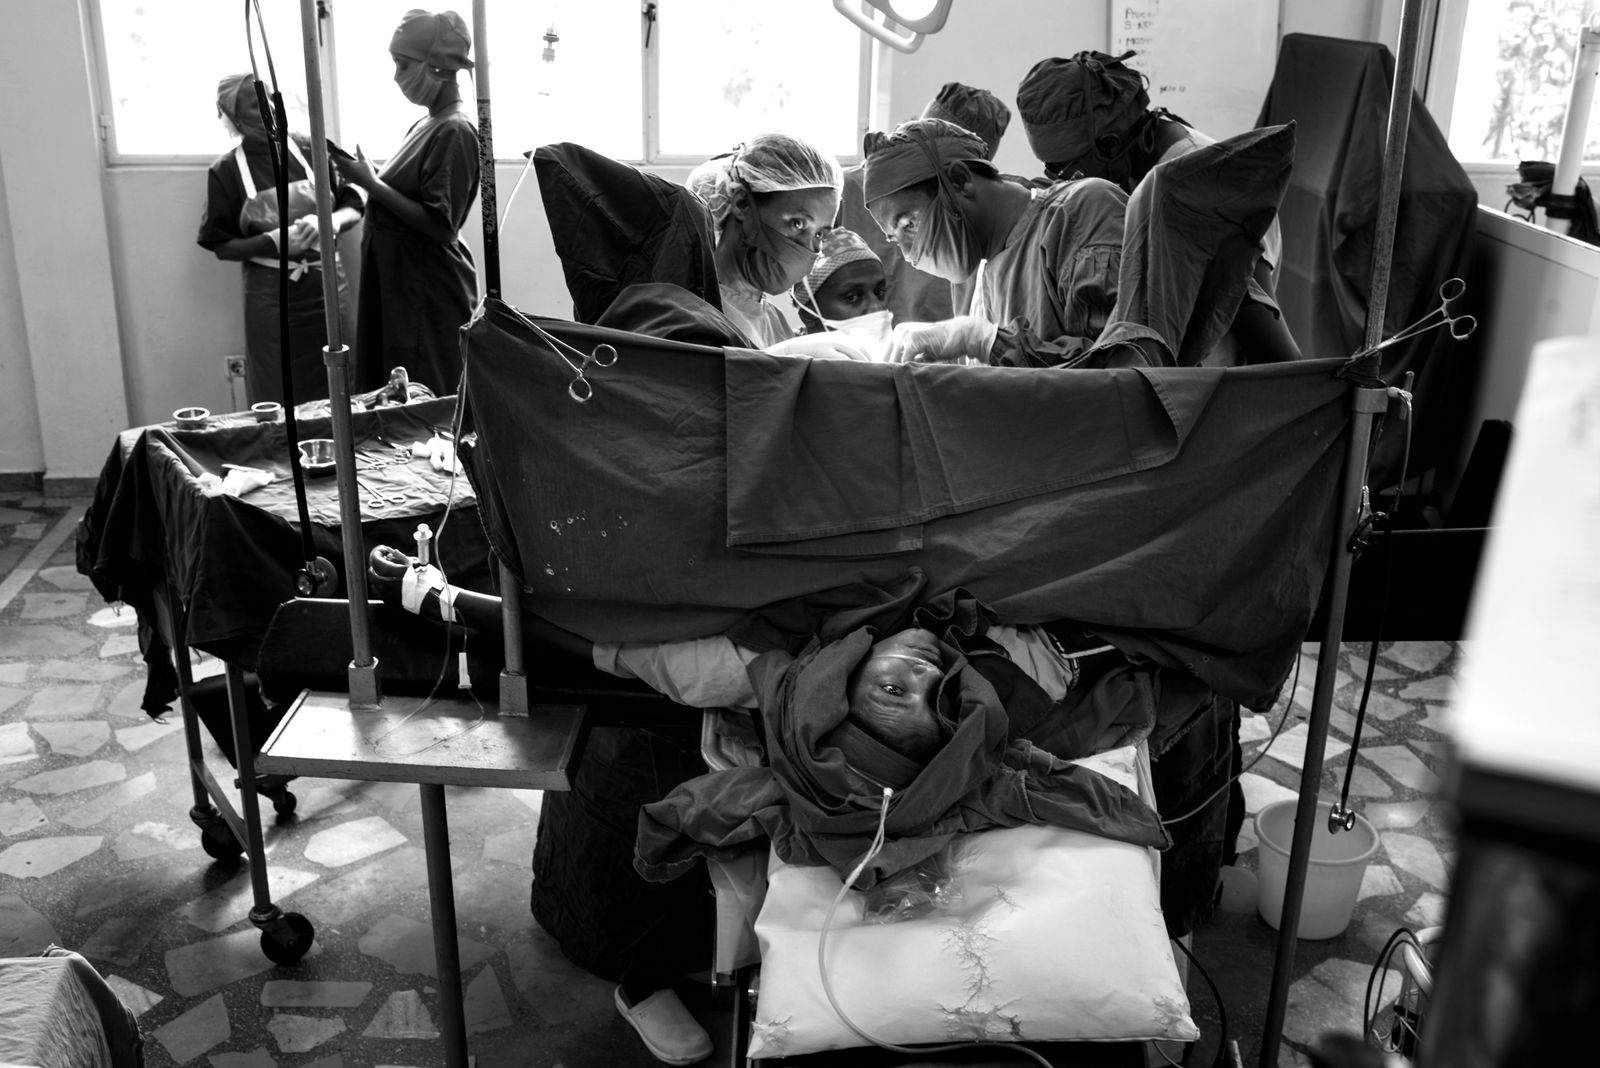 © Ida Guldbaek Arentsen - Sichale undergo her fistula surgery at the hospital. She has been incontinent for almost one and a half year.